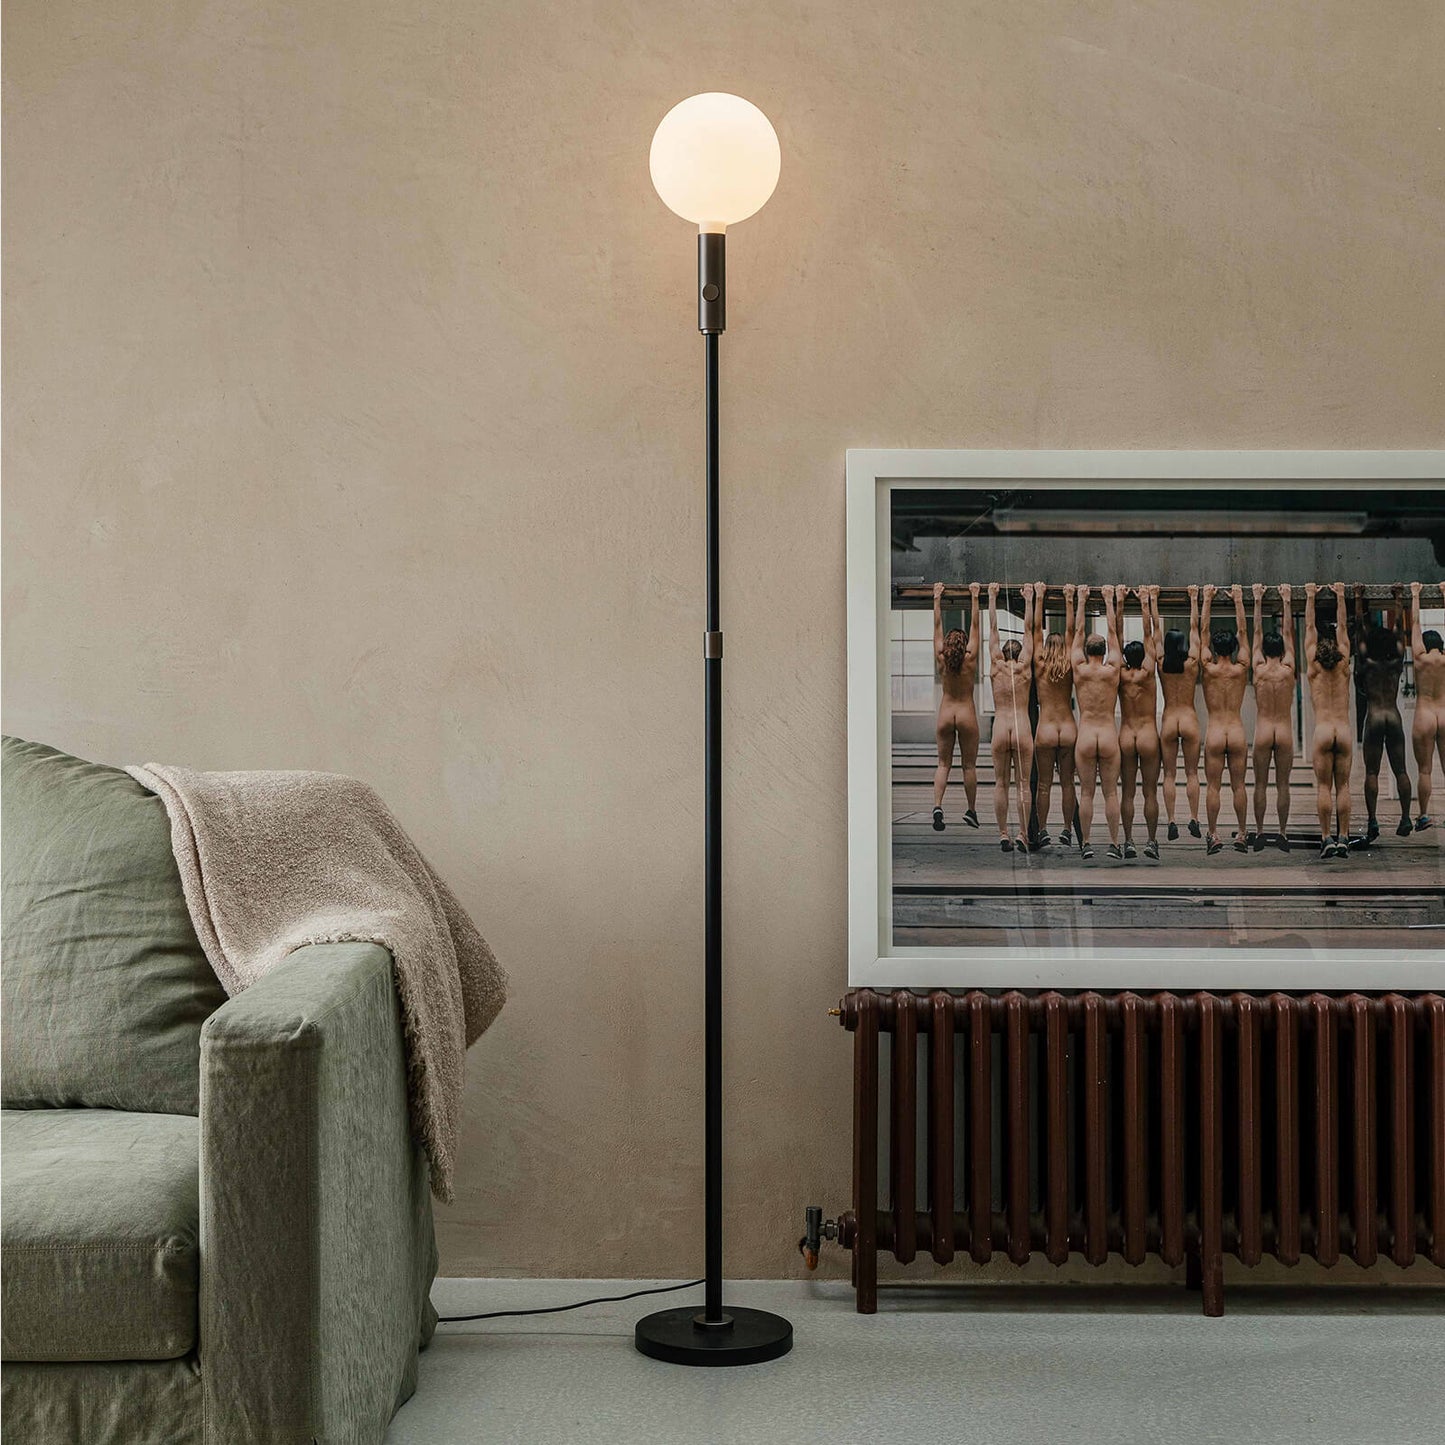 Poise Adjustable Floor Lamp with Sphere V